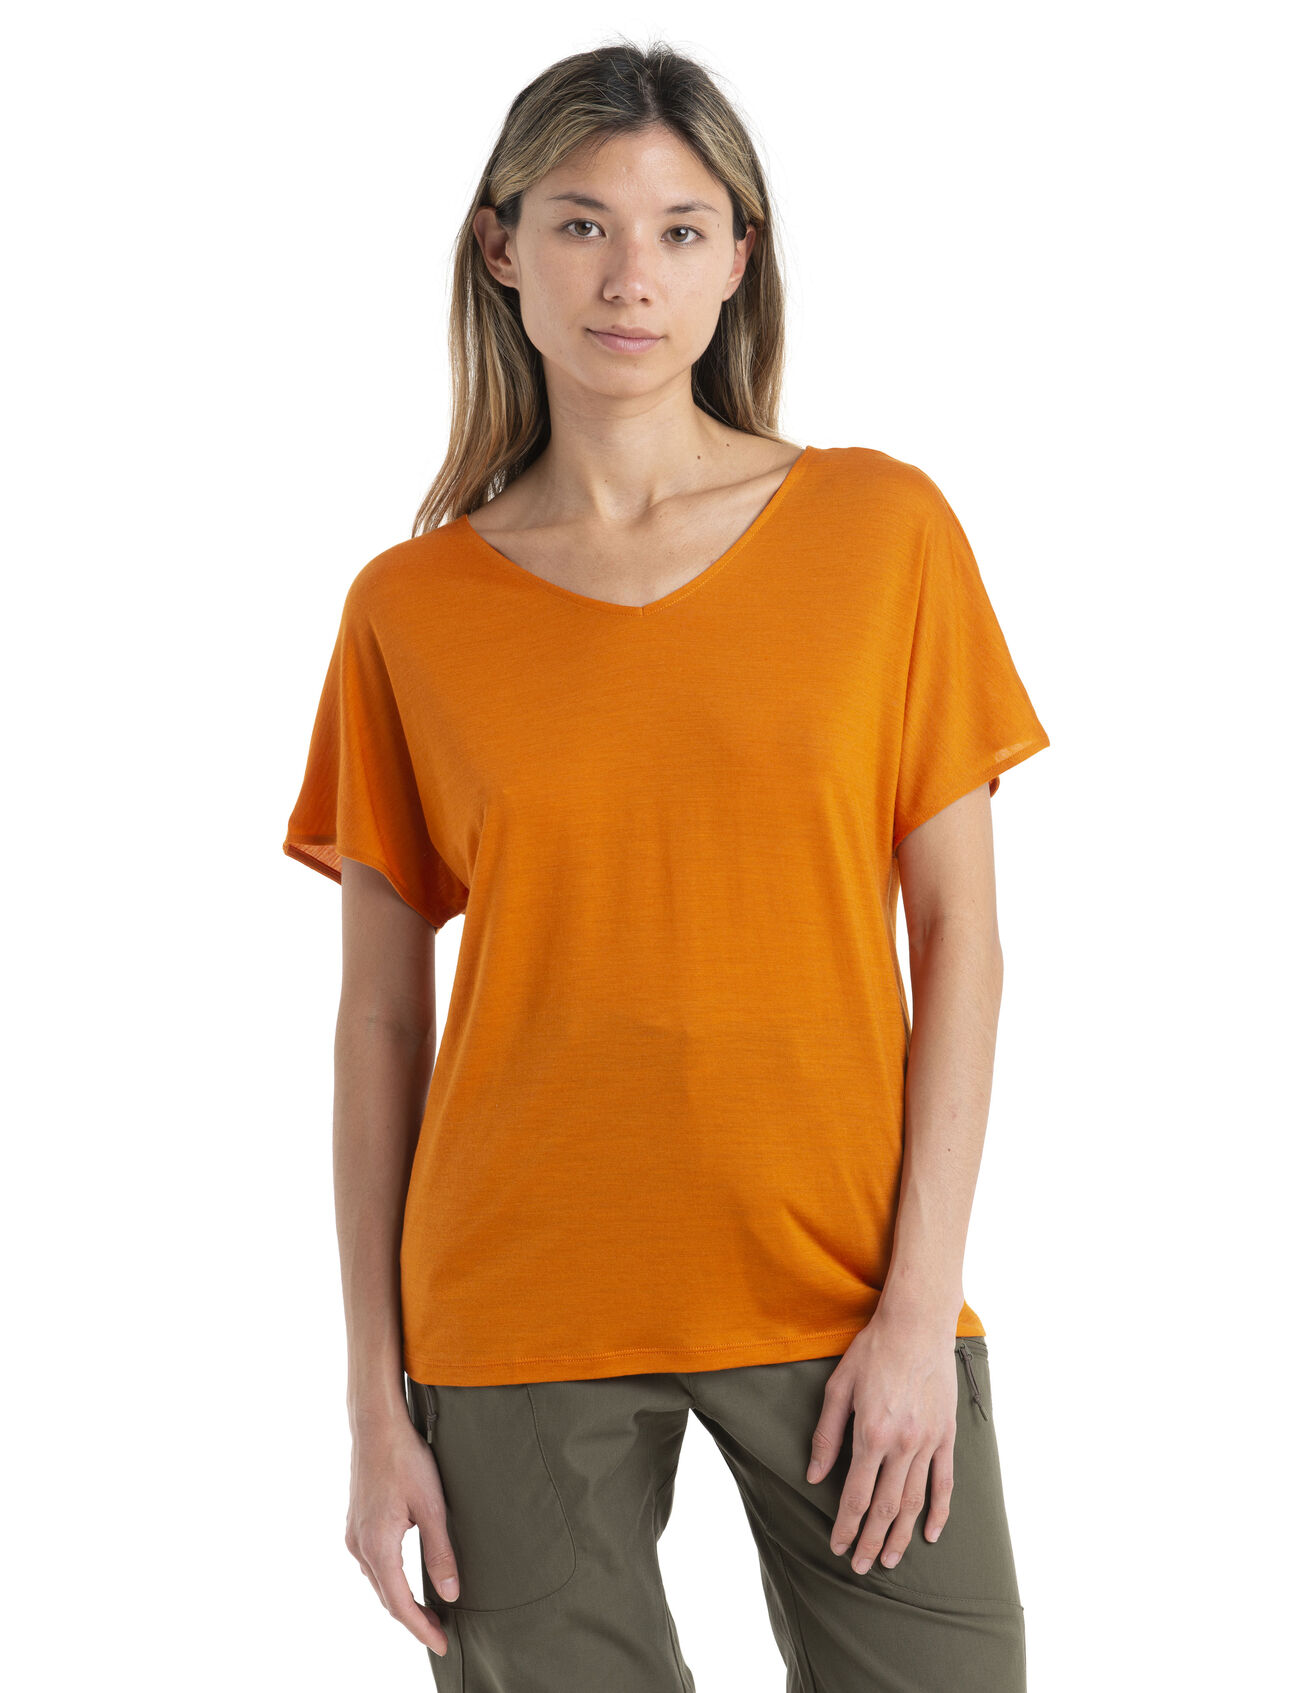 Womens Merino Drayden Reversible Short Sleeve Top A versatile everyday shirt featuring our Cool-Lite™ jersey fabric, the Drayden Reversible Short Sleeve Top can be worn frontwards for a soft V neck, or backwards for a high crew neck.